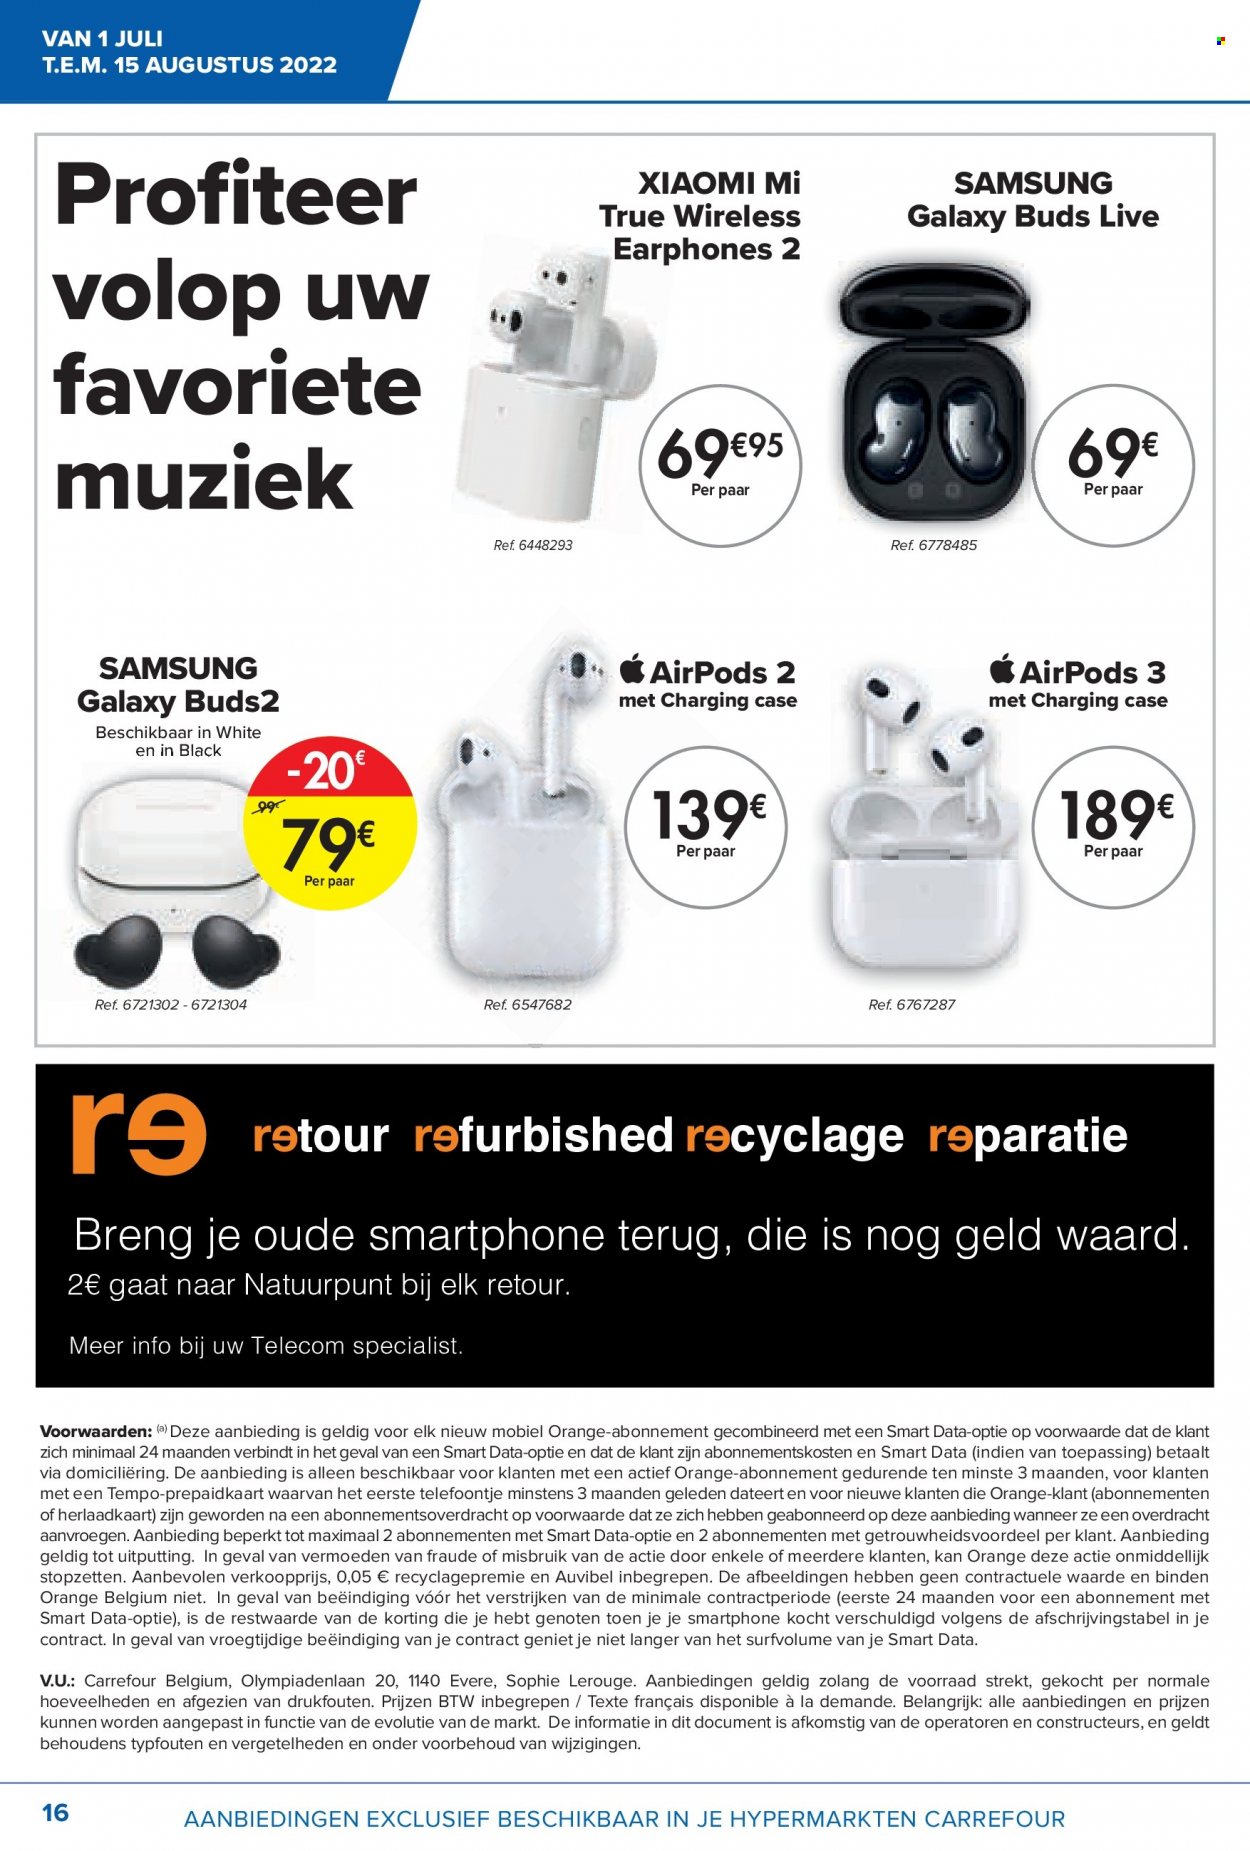 Catalogue Carrefour hypermarkt - 1.7.2022 - 15.8.2022. Page 16.